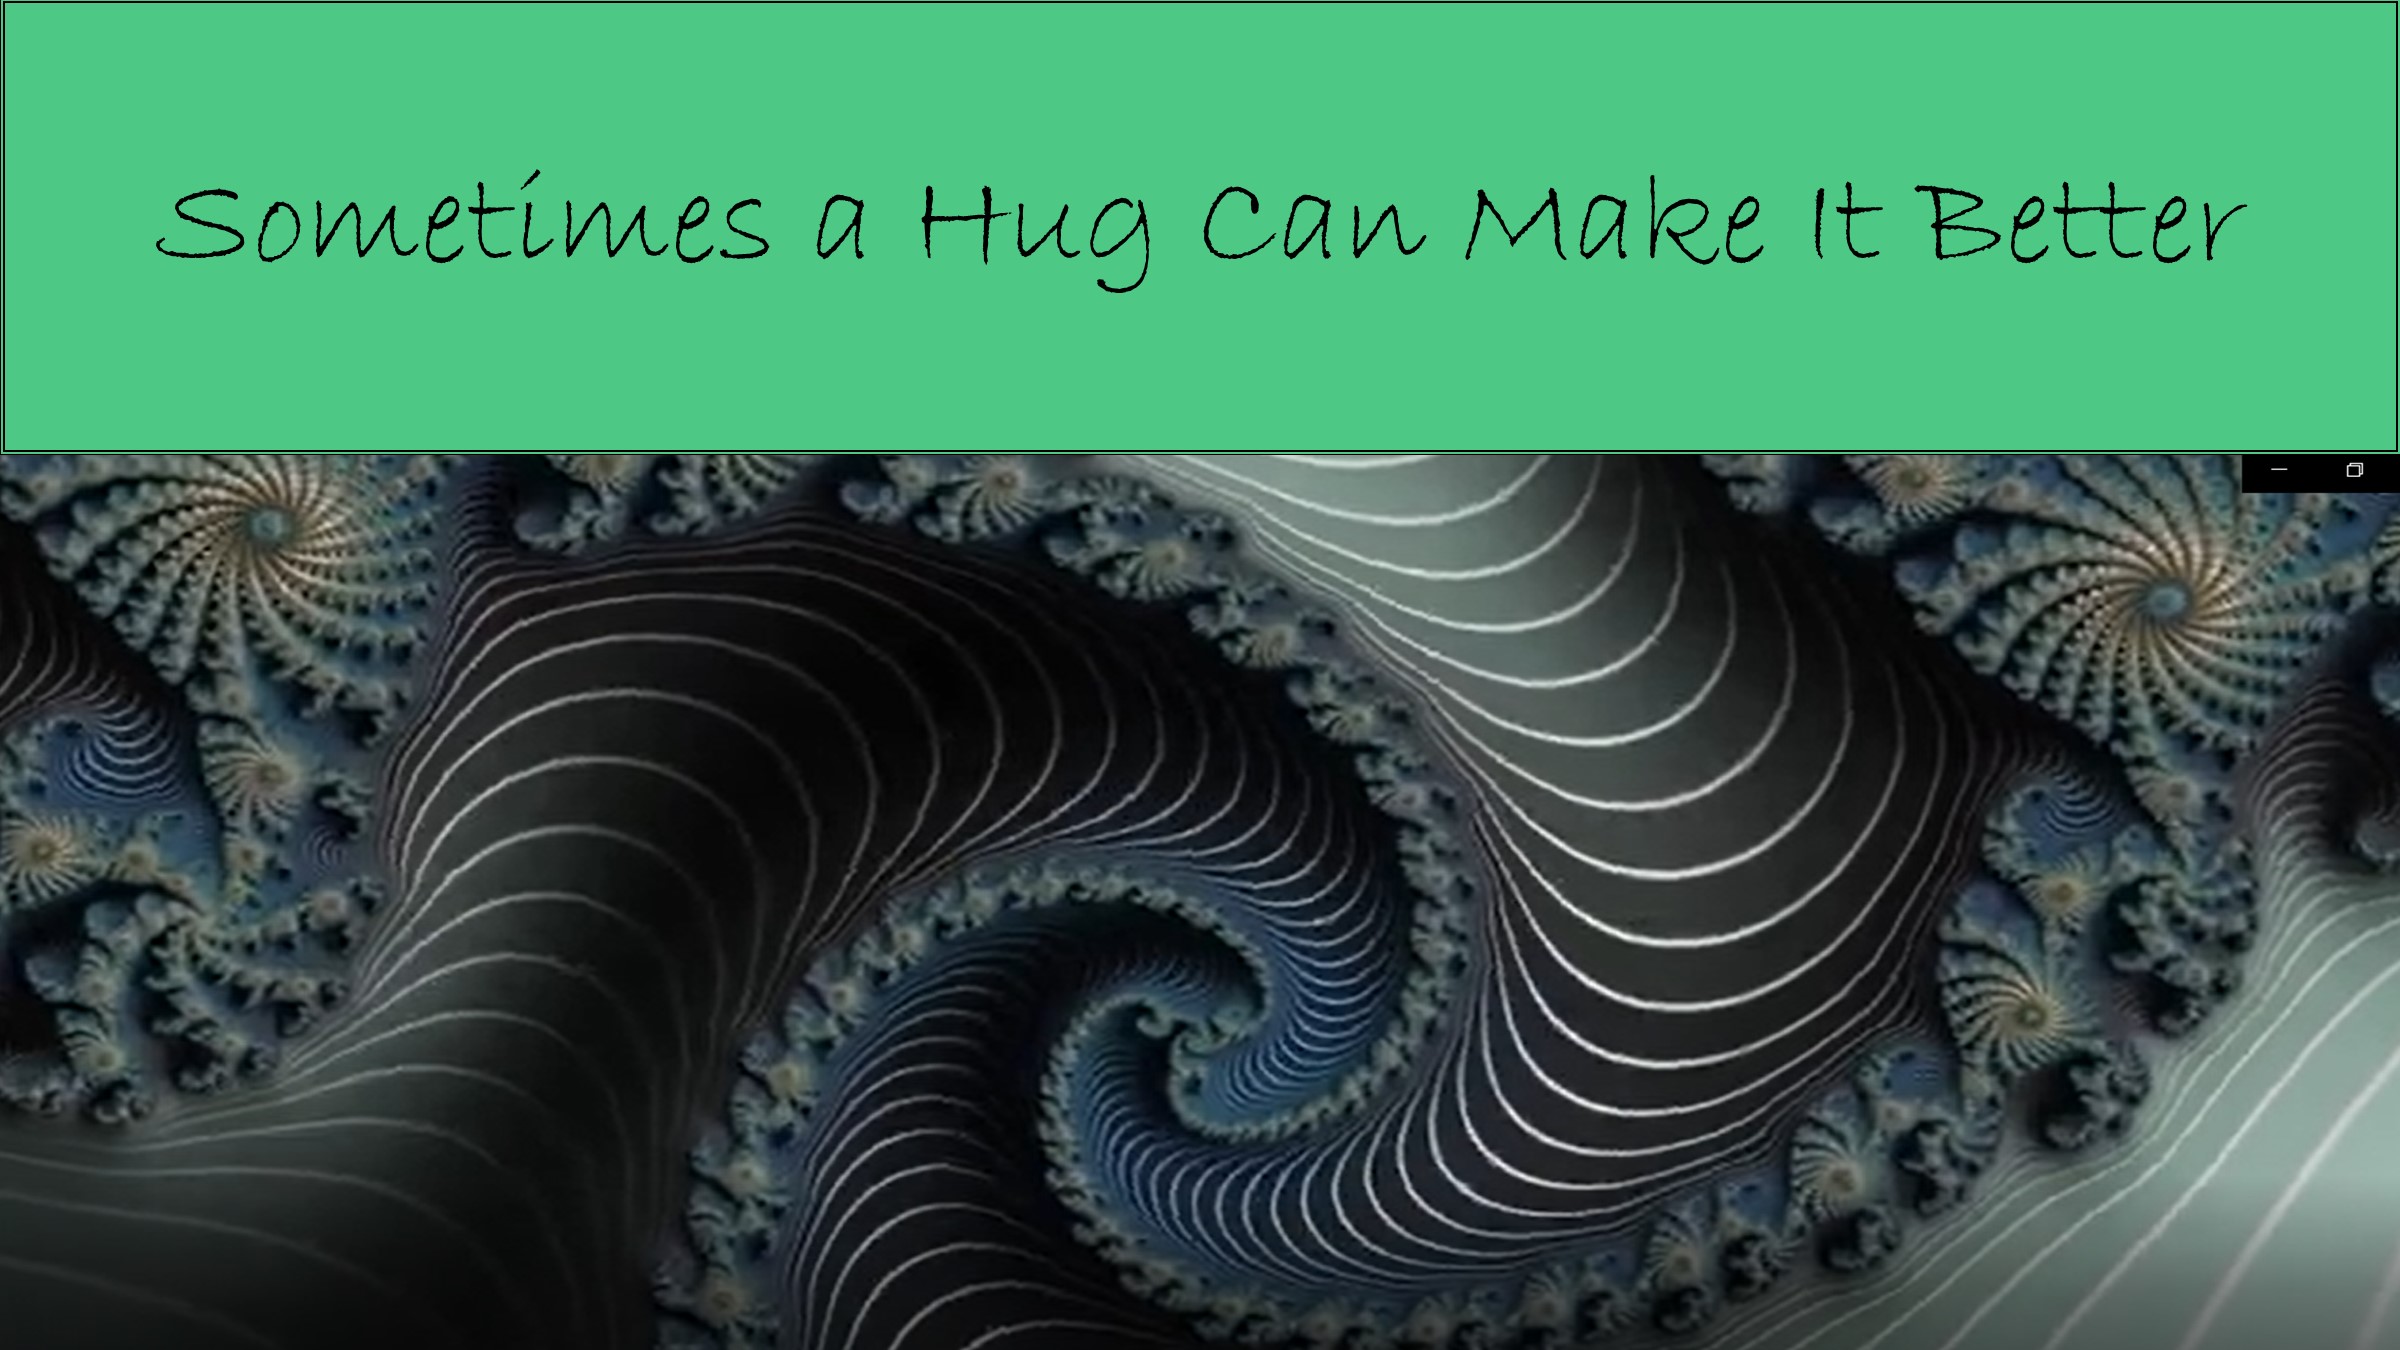 Sometimes a Hug Can Make It Better (thank you, The Beatles!)